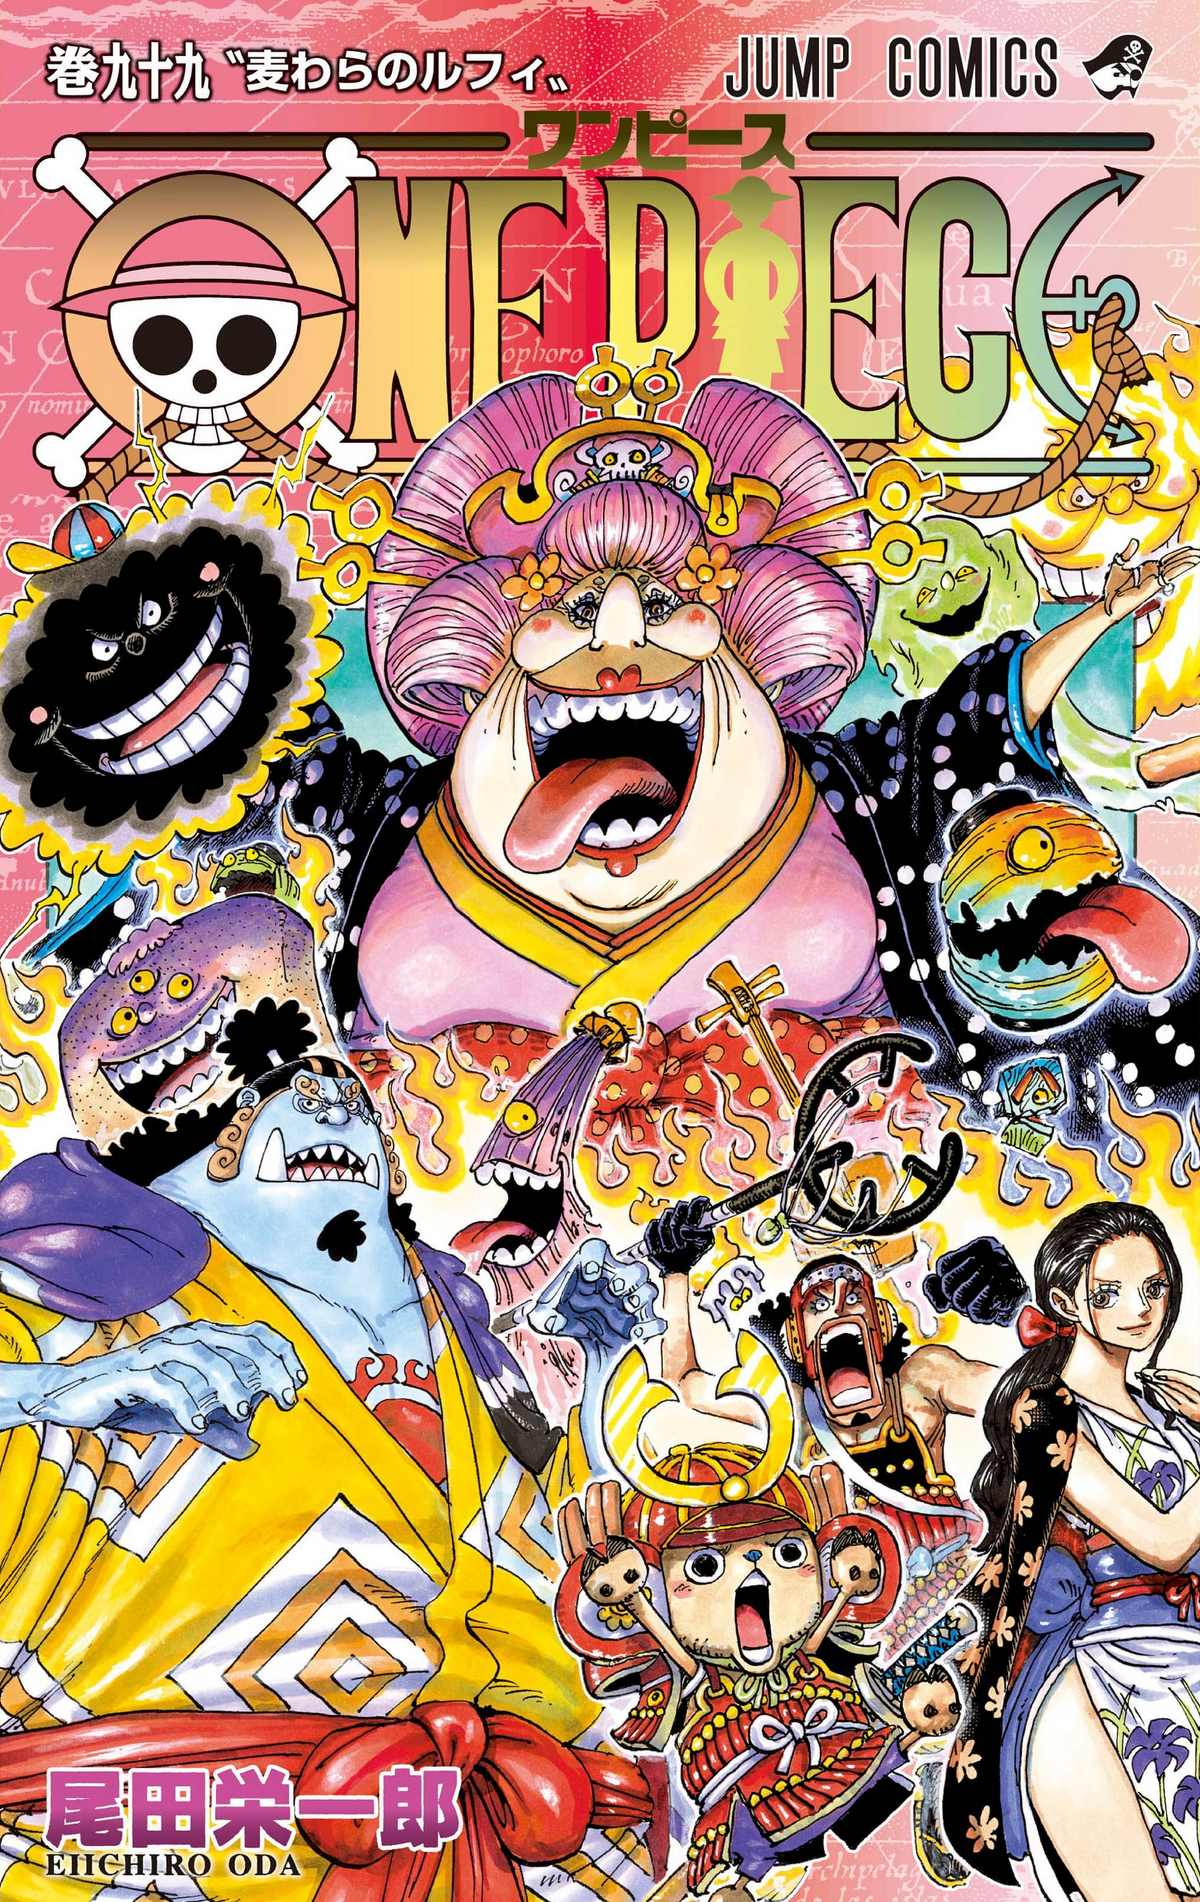 One Piece 81, Nami Asks For Help One of the Best Chapters